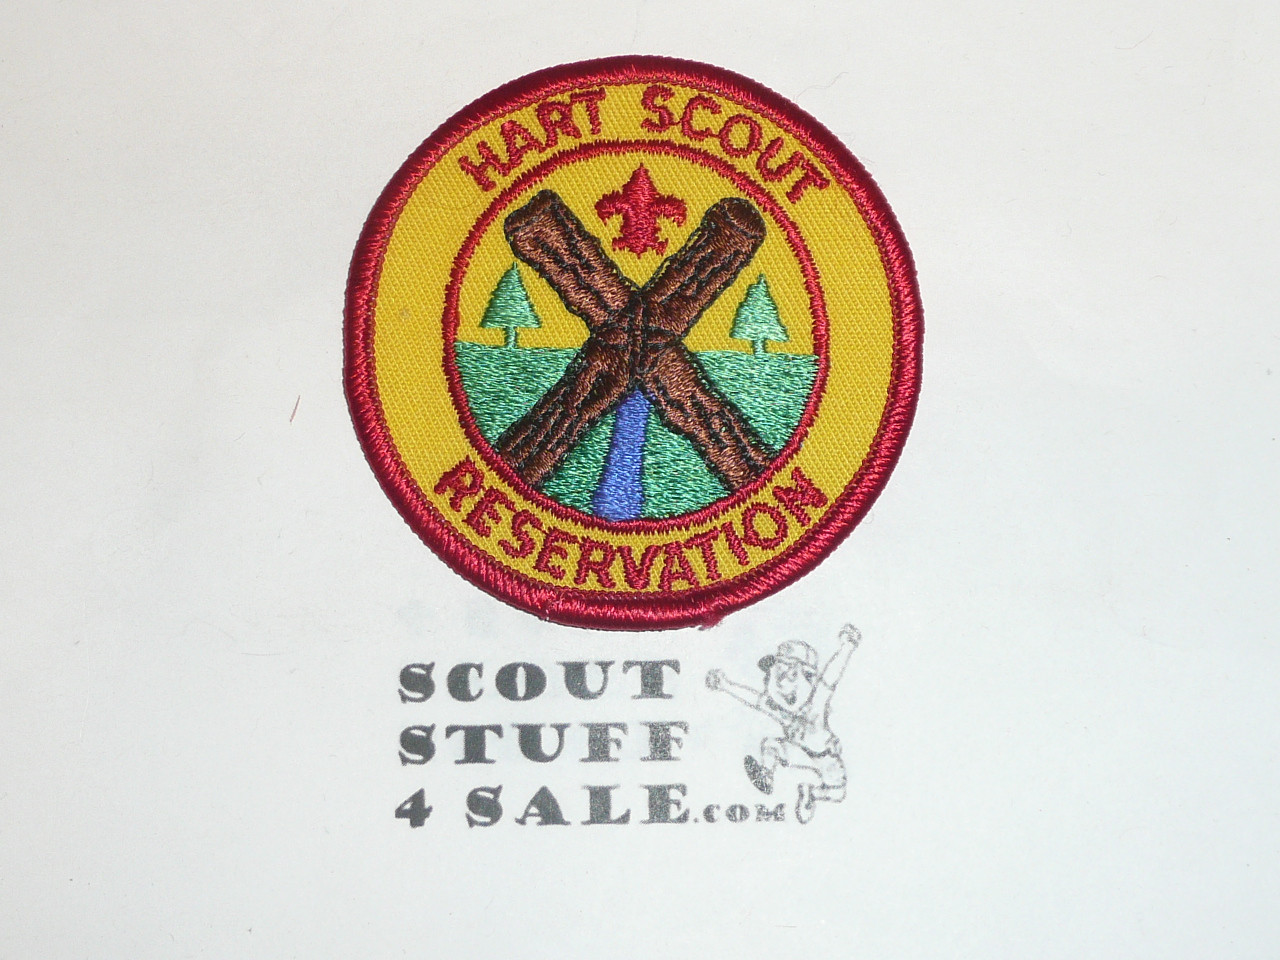 Hart Scout Reservation Patch, yellow twill